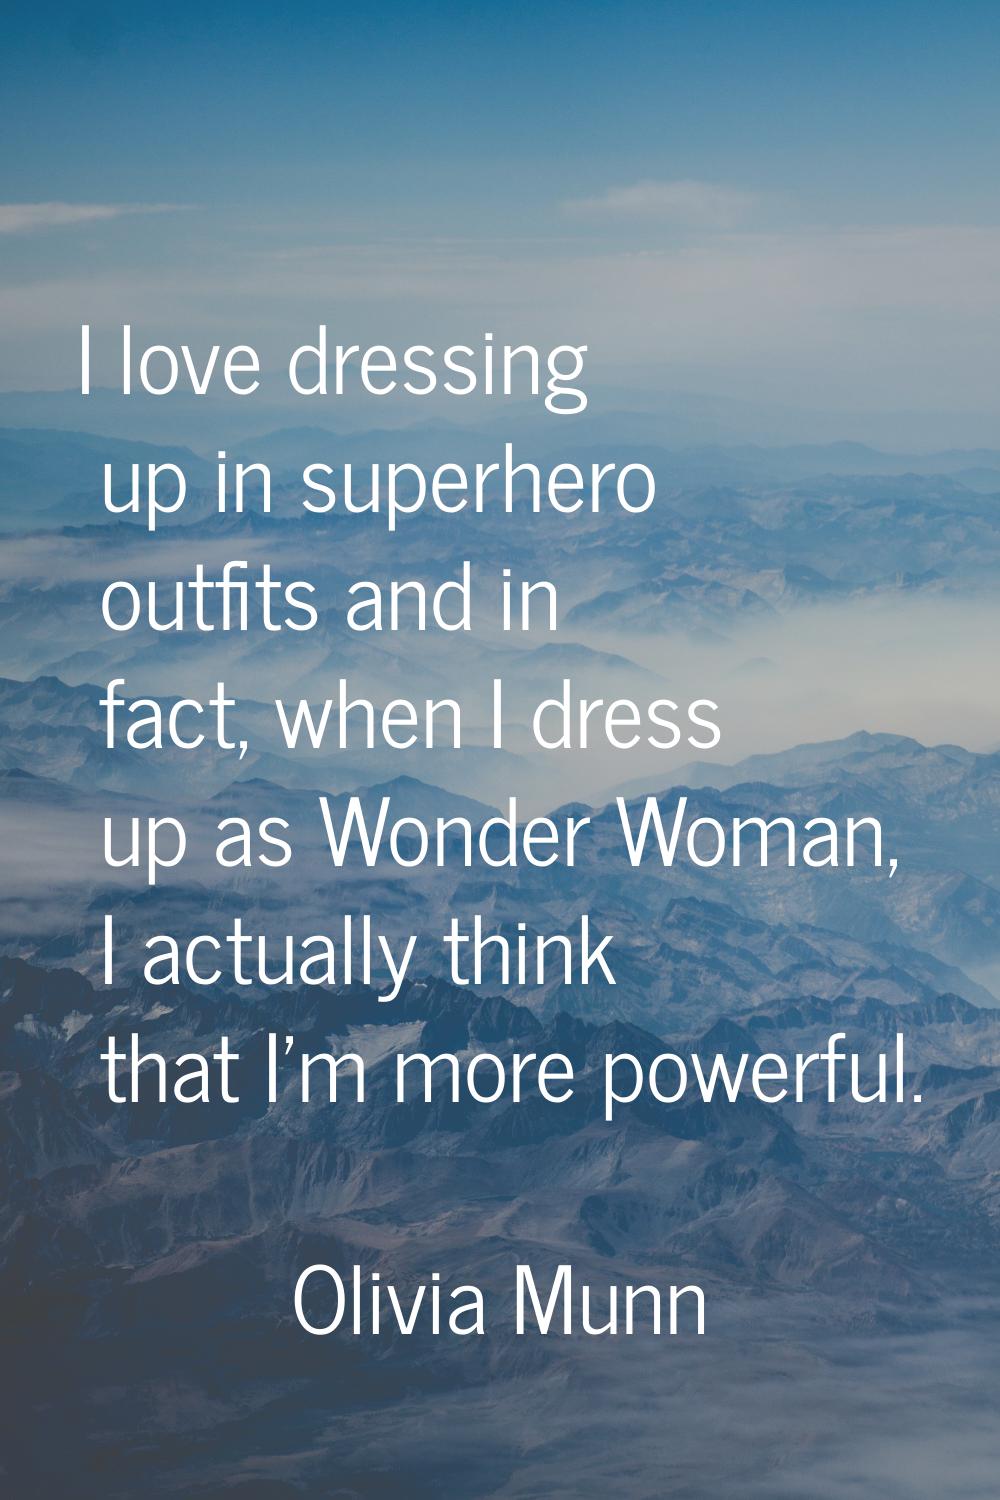 I love dressing up in superhero outfits and in fact, when I dress up as Wonder Woman, I actually th